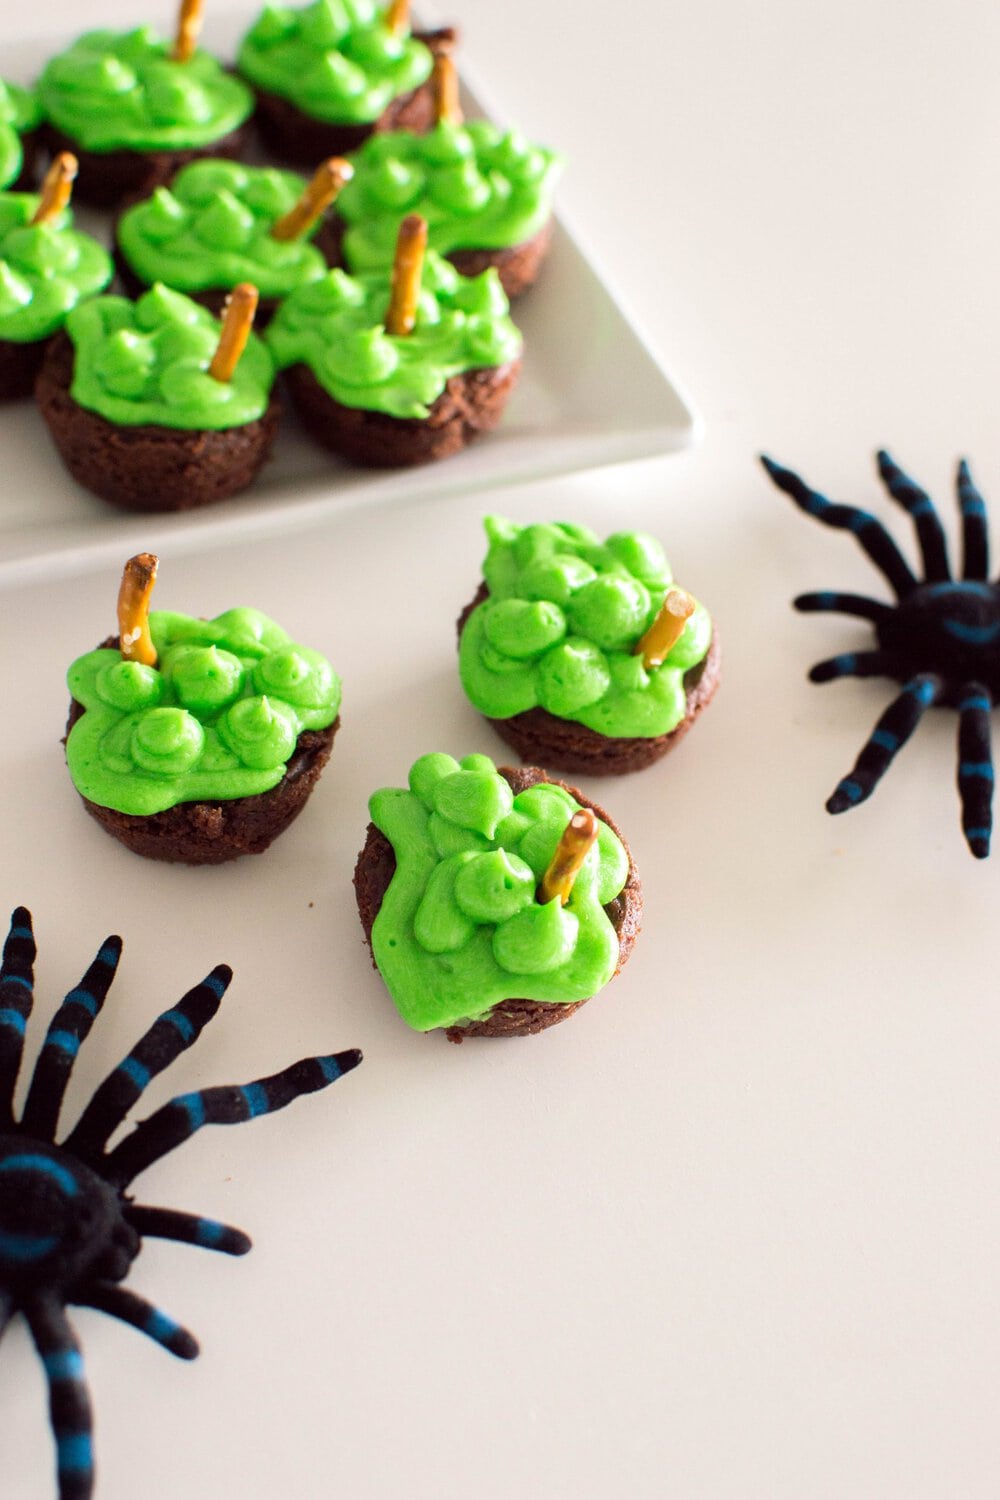 Don’t have enough time? These Witch Cauldron Brownies only take a few minutes to whip up but they totally look pro!